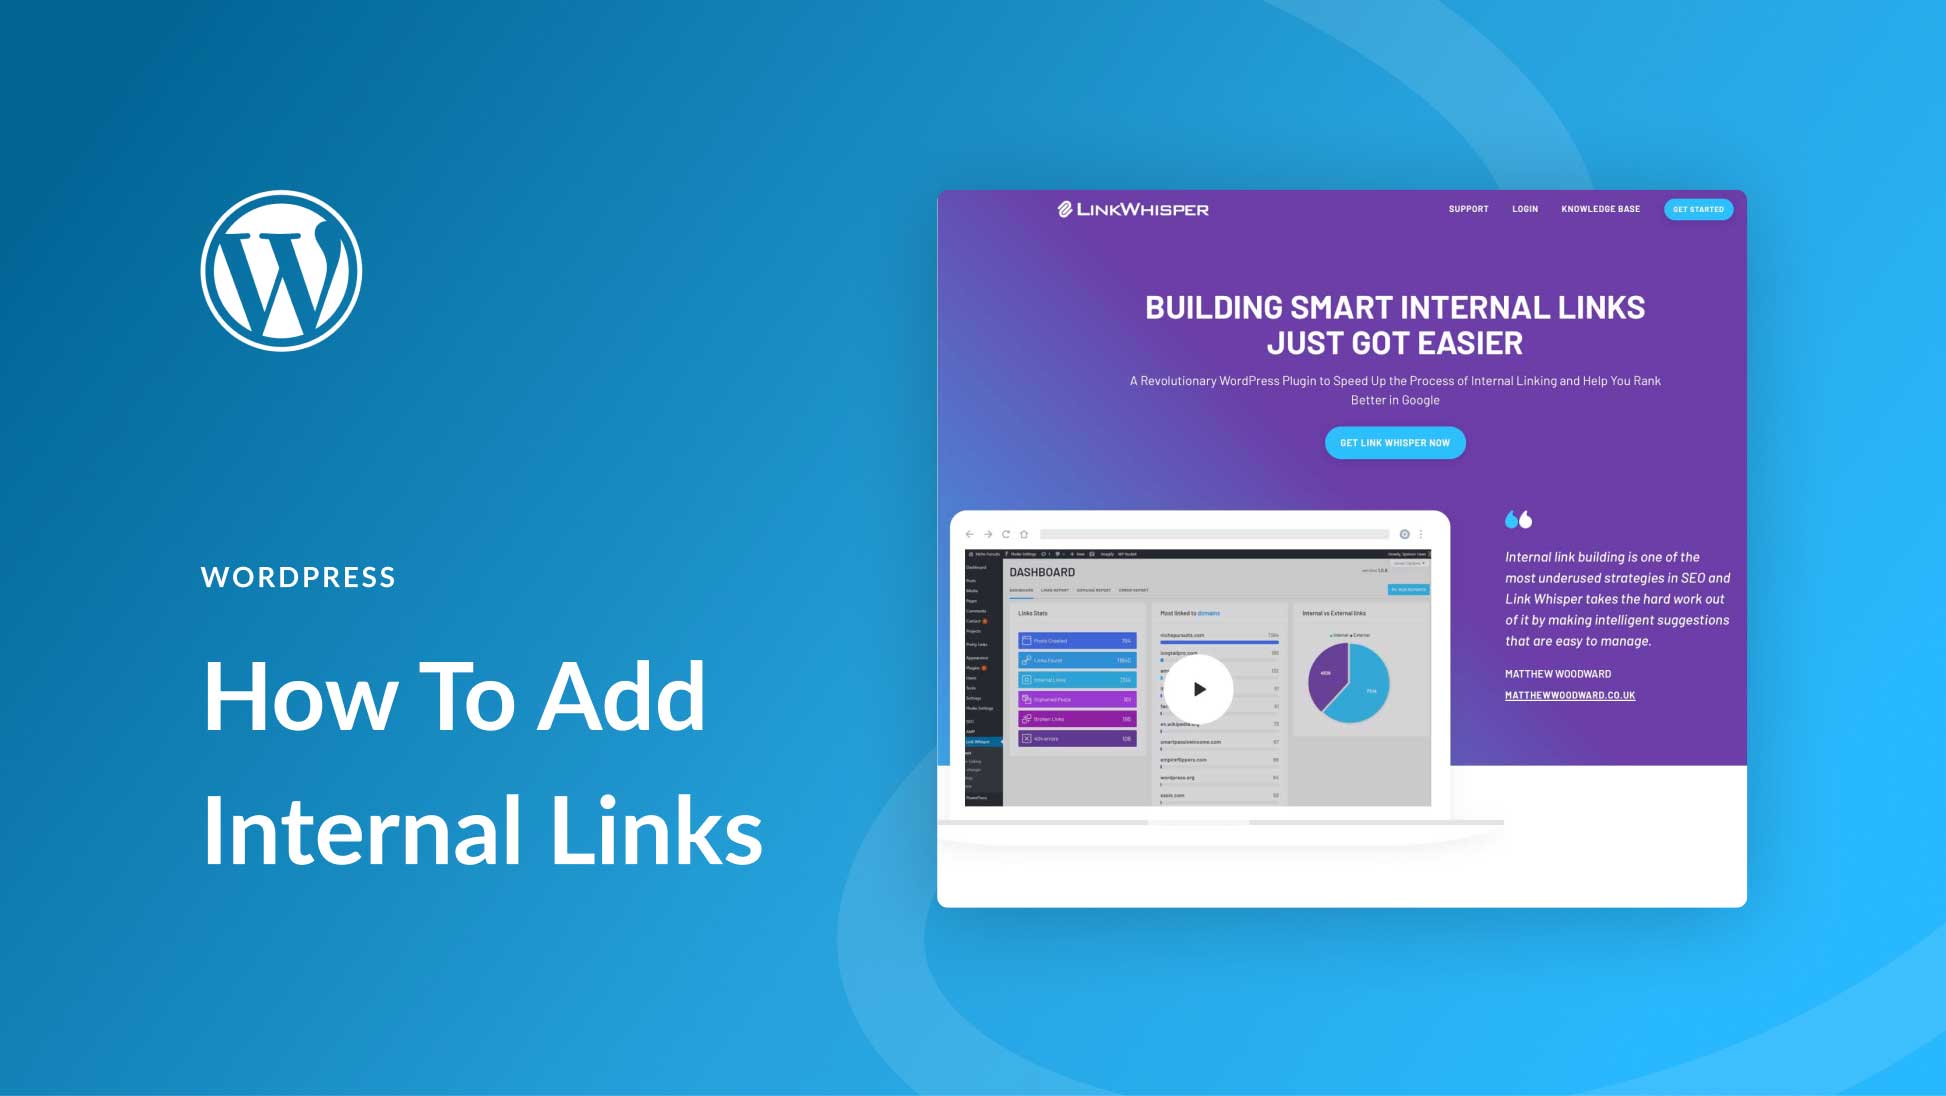 How to Add Internal Links in WordPress the Easy Way (Using Link Whisper)